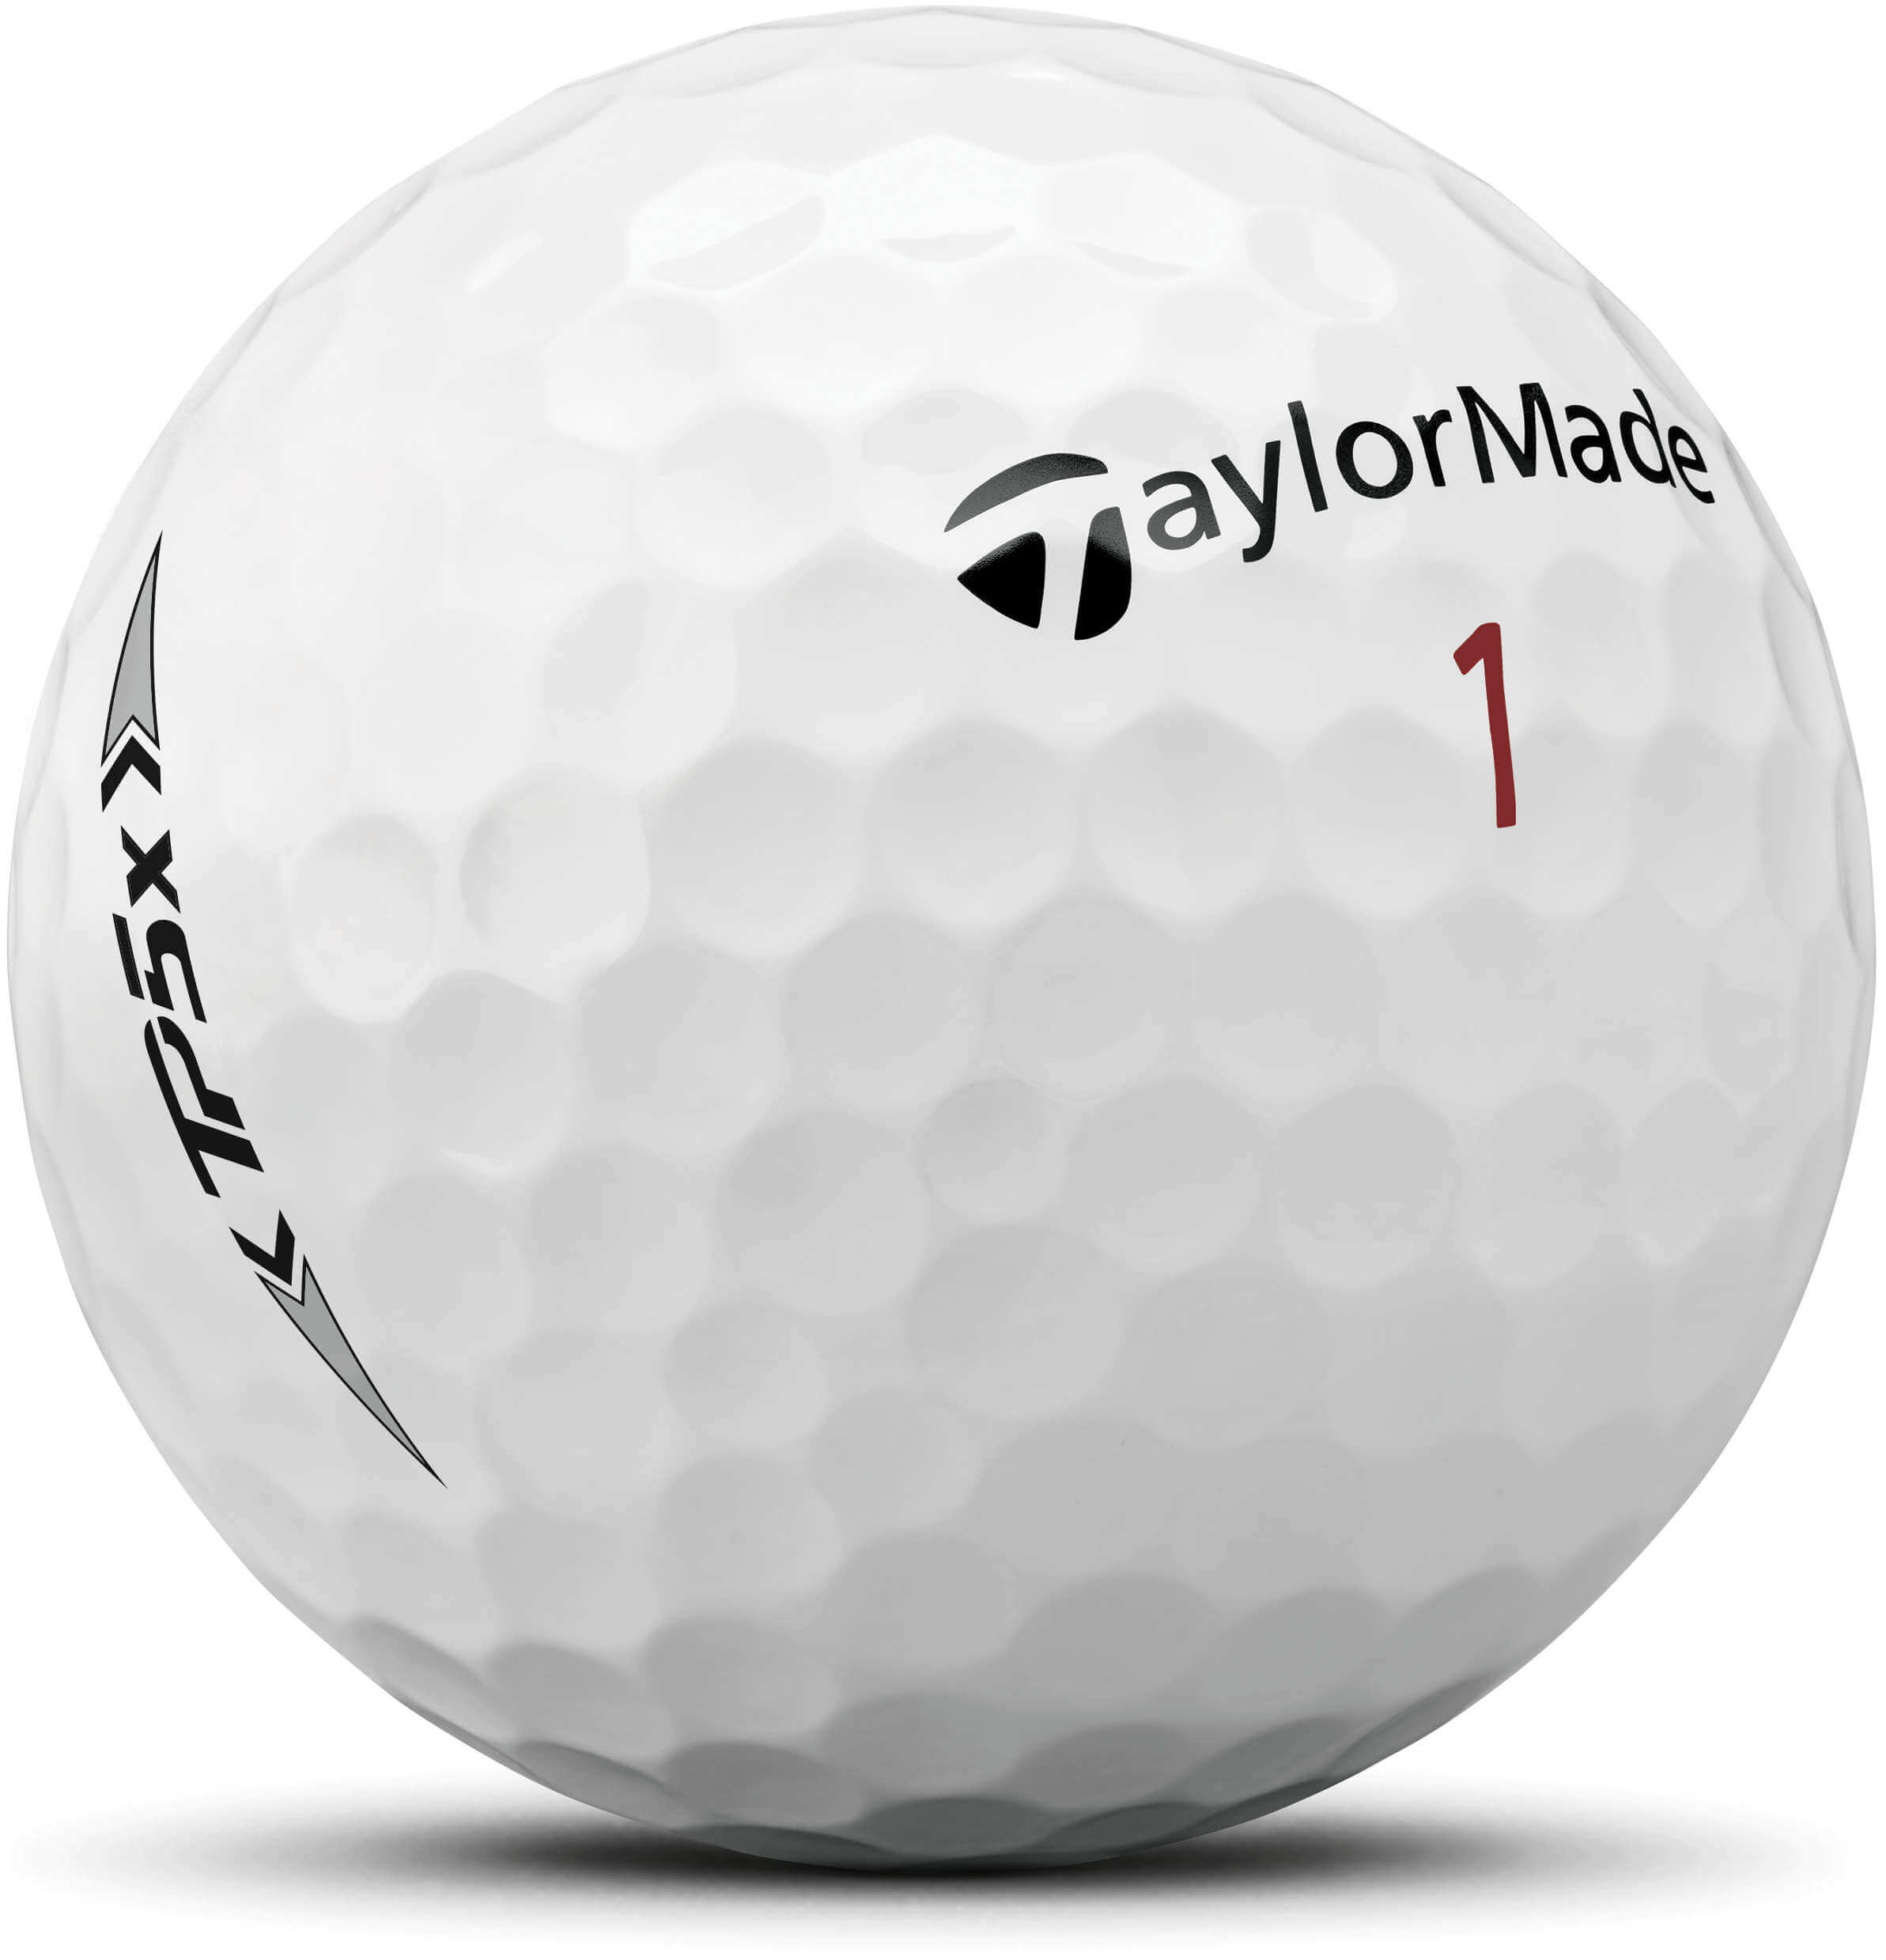 TaylorMade TP5x Golfbälle, white 3er Sleeve